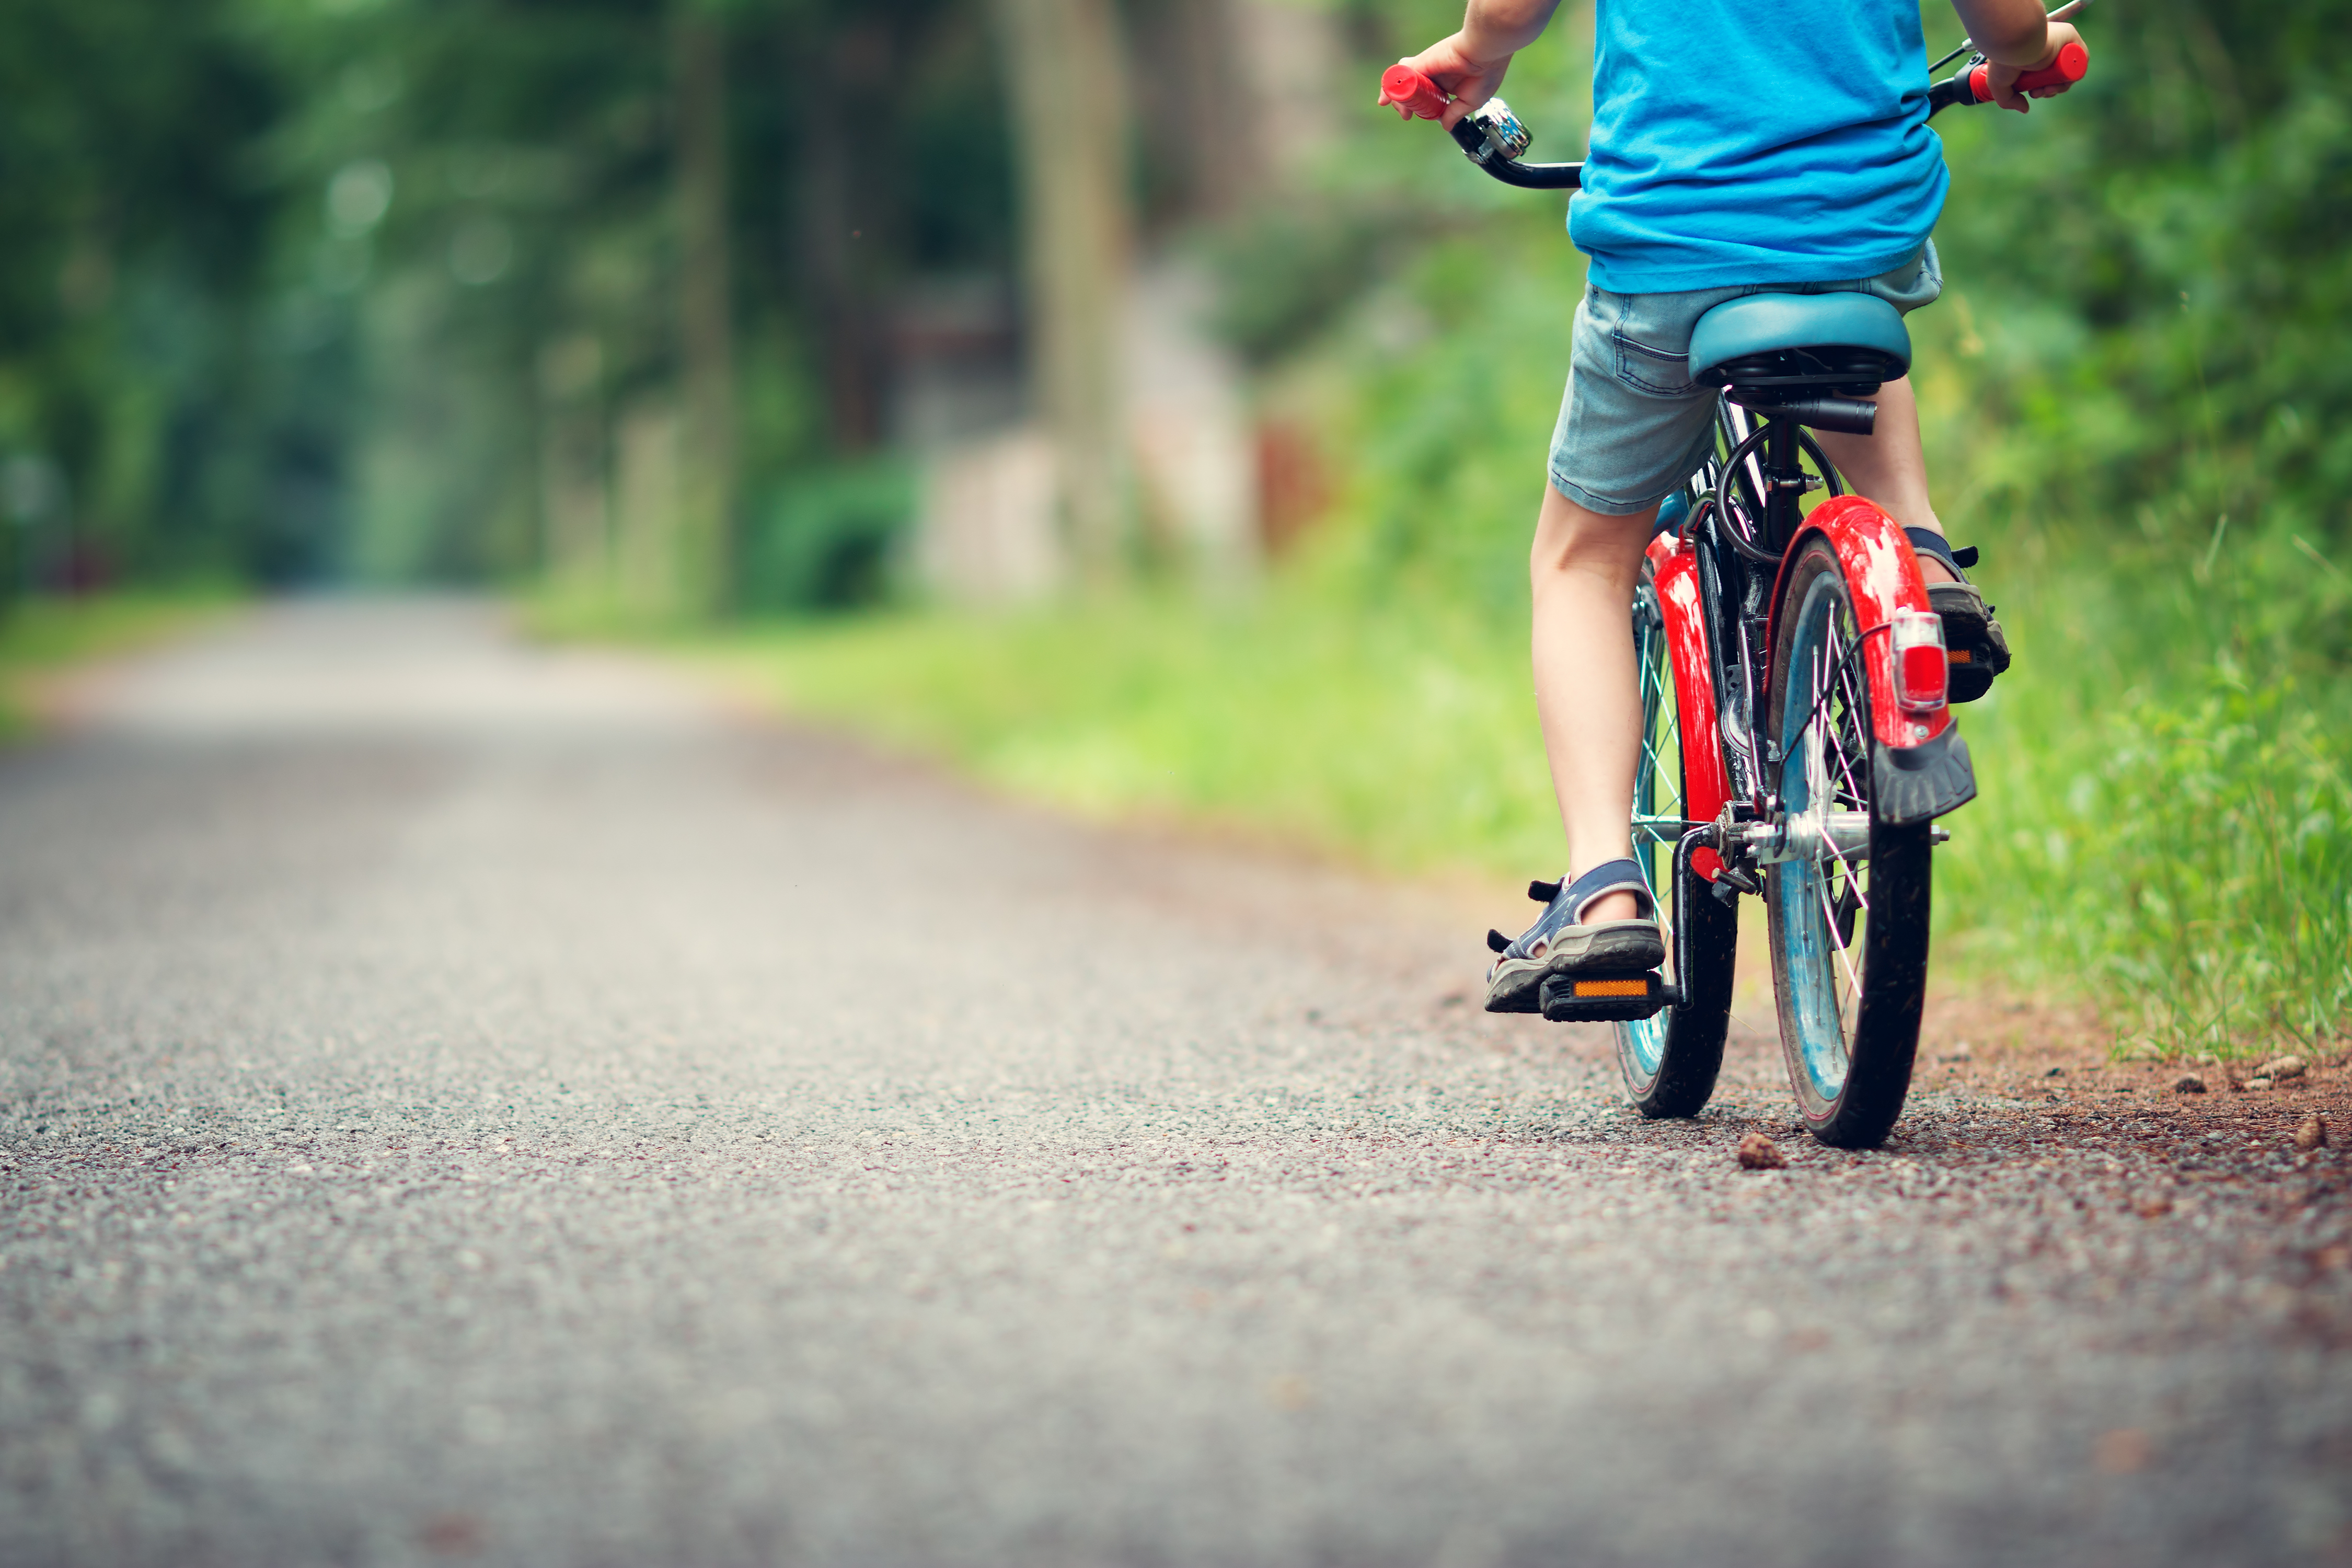 What every parent ought to know about bike safety